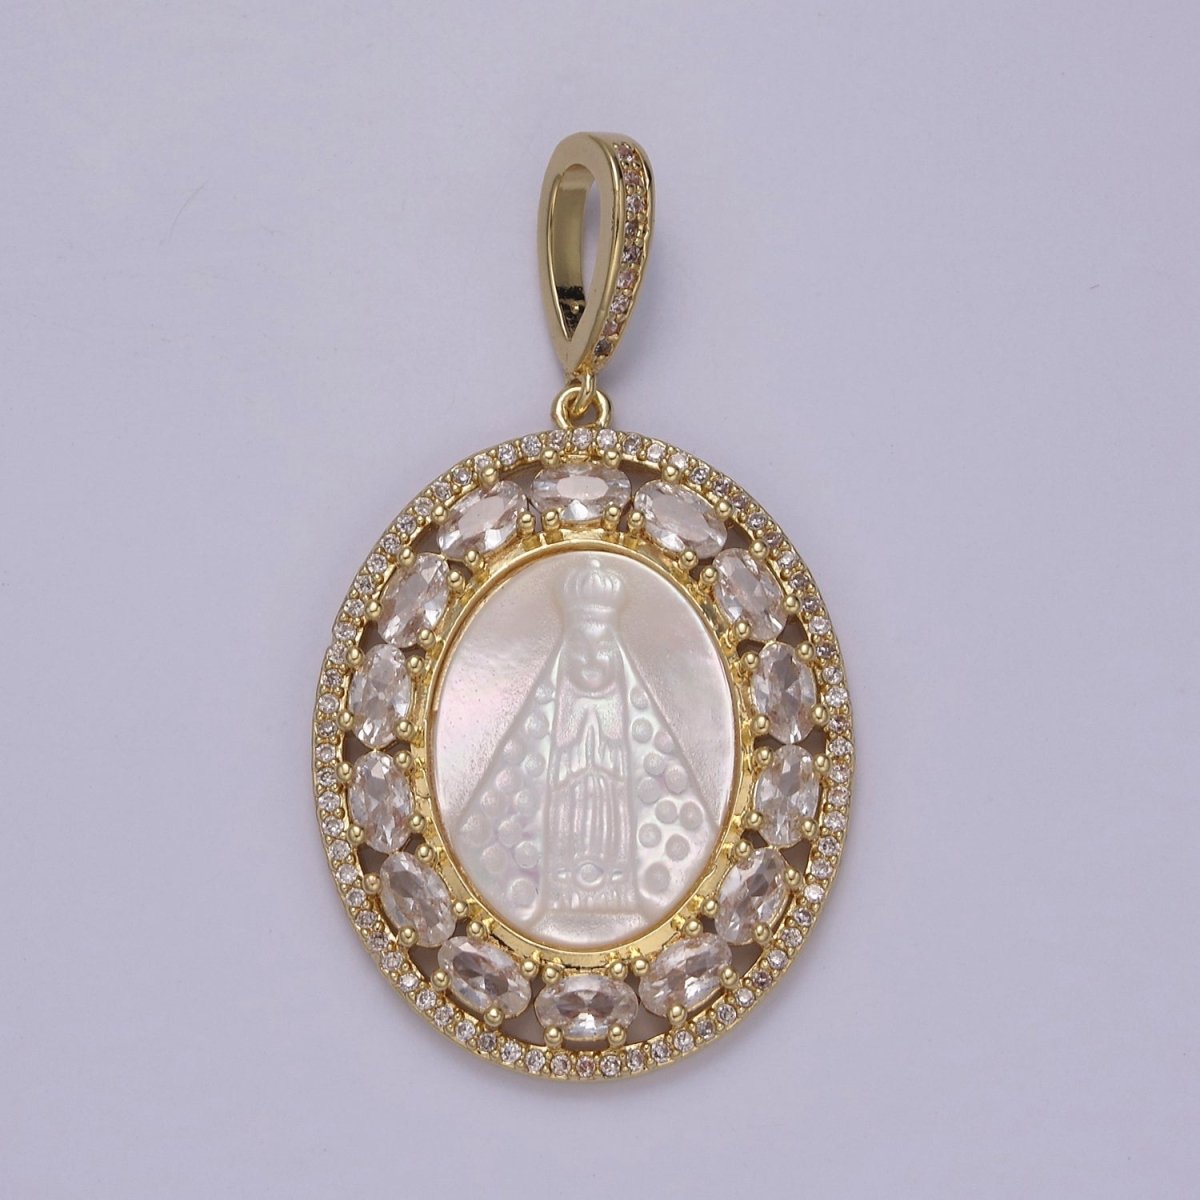 Statement Gold Filled Cubic Zirconia Bezeled Mother Of Pearl Virgin Mary Lady of Guadalupe Pendant Necklace for Religious Jewelry Making N-571 - DLUXCA